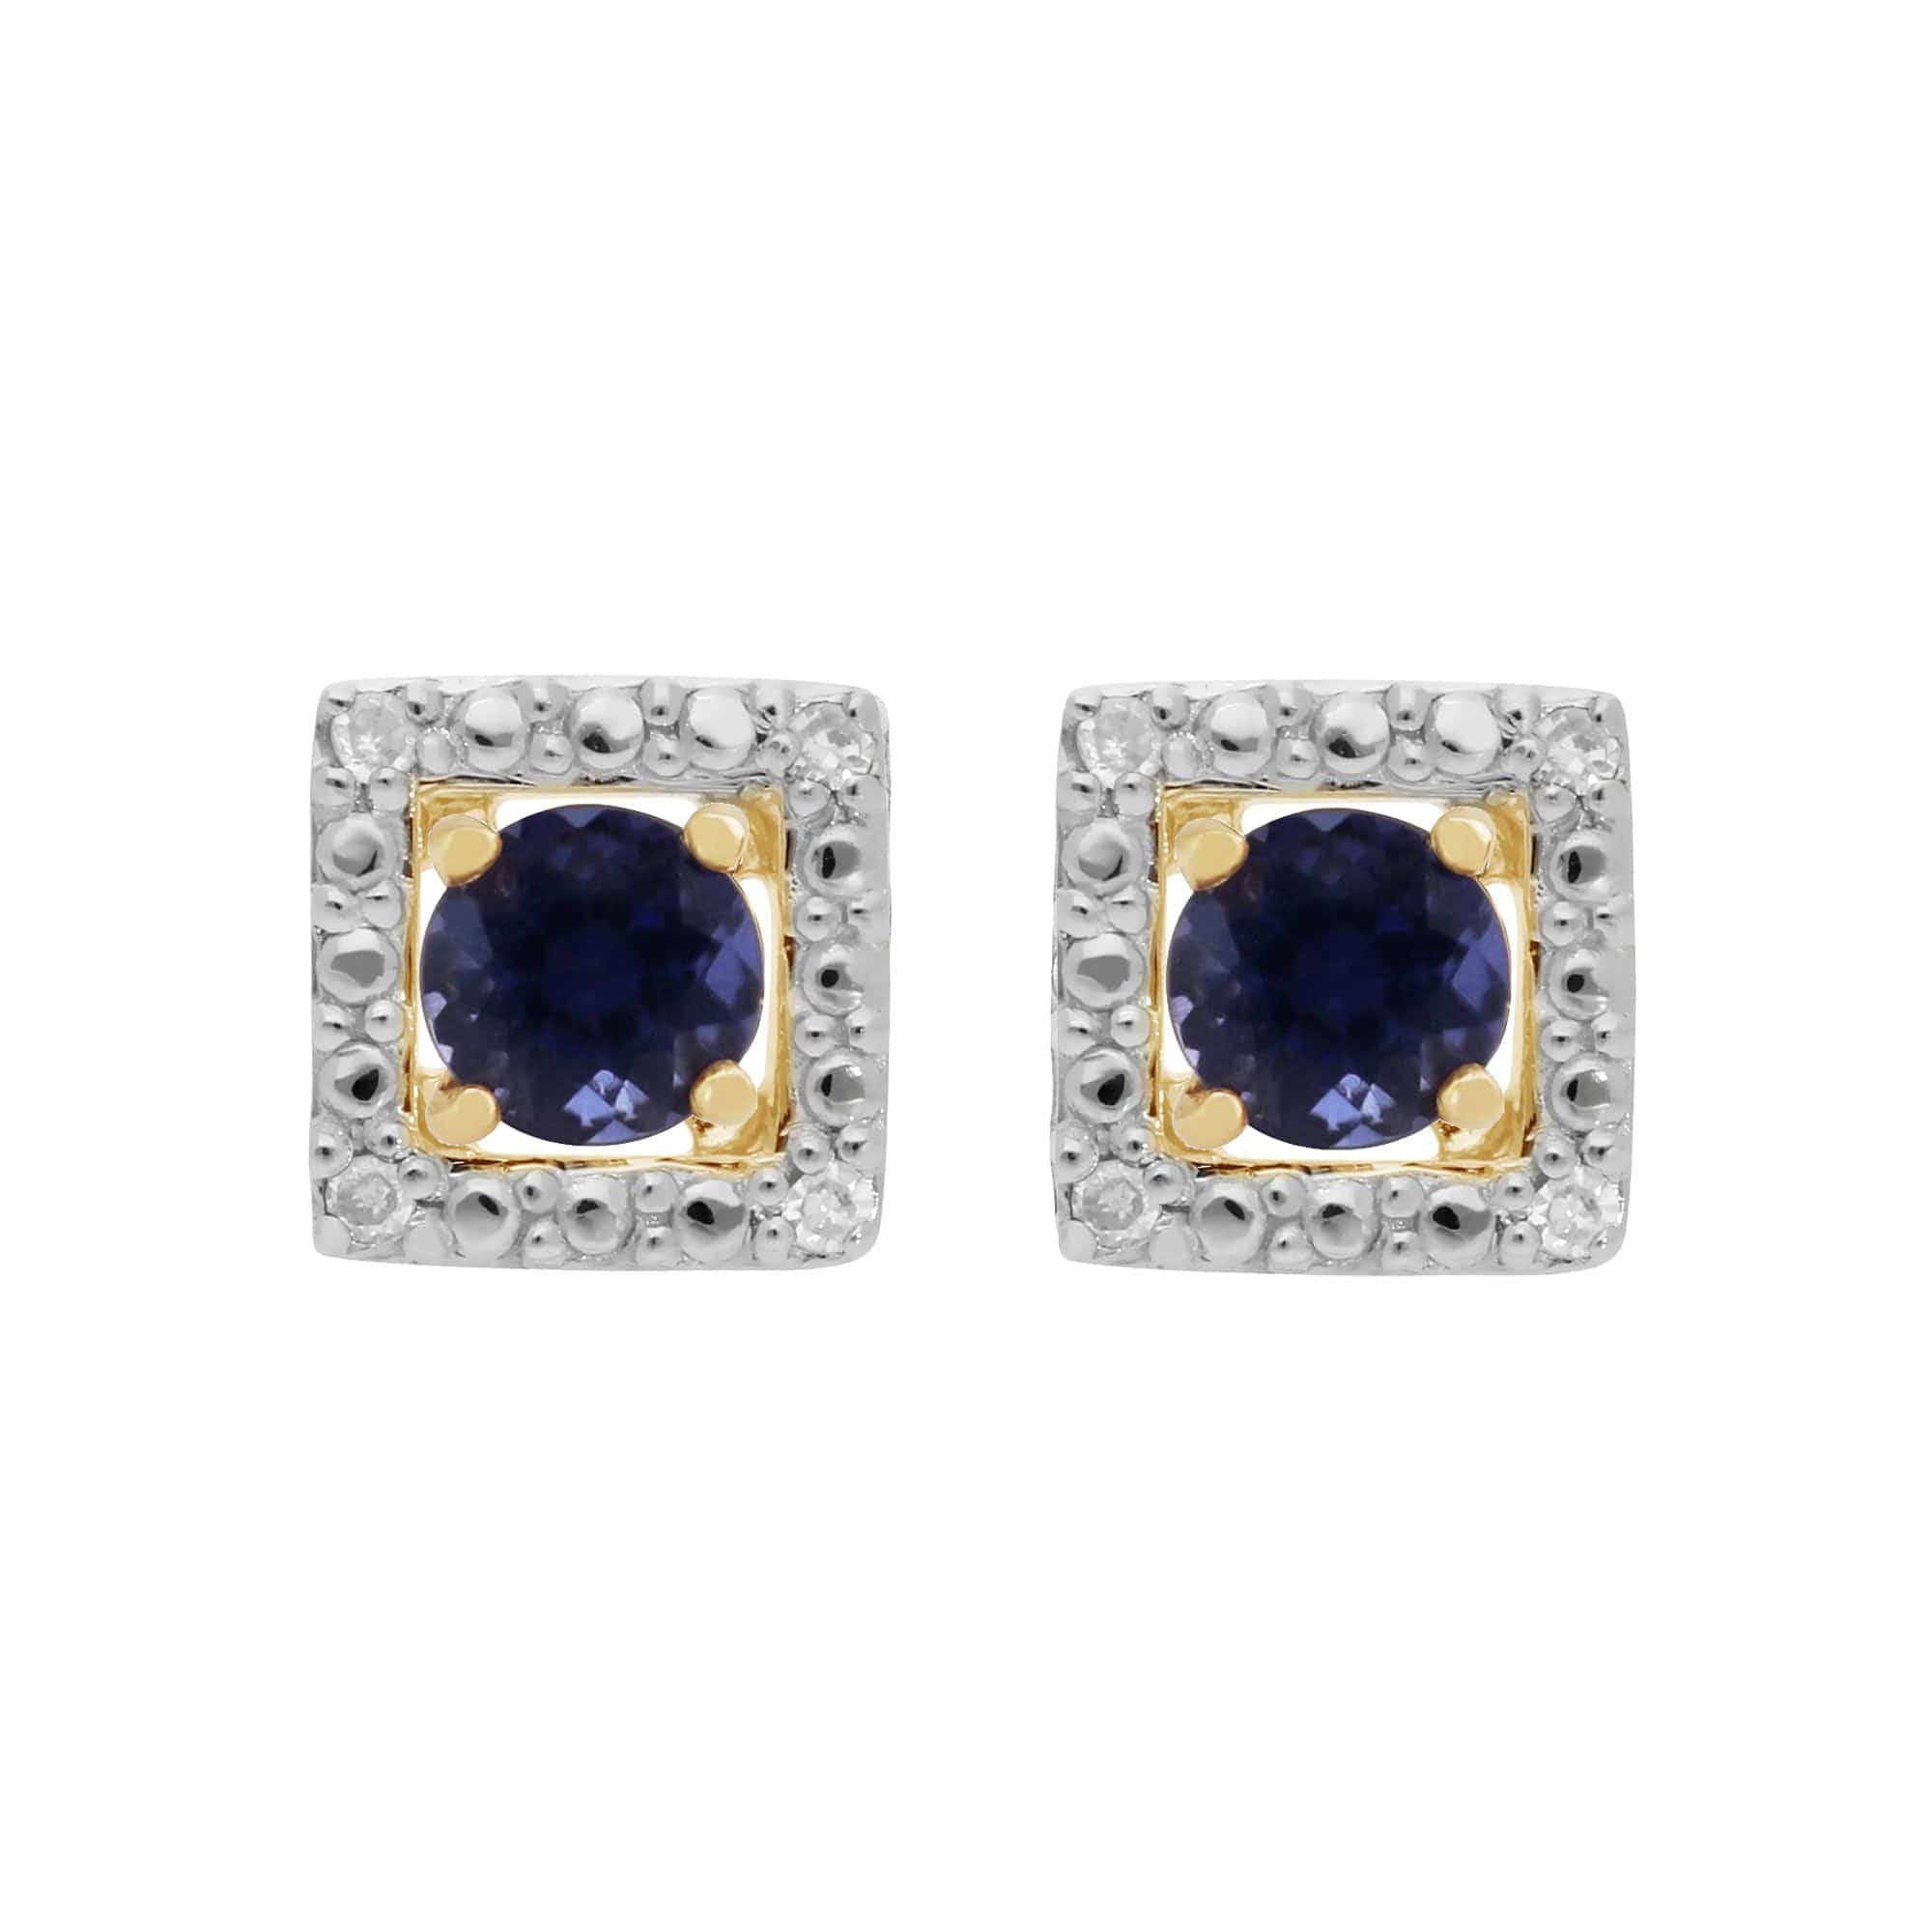 11556-191E0379019 Classic Round Iolite Stud Earrings with Detachable Diamond Square Earrings Jacket Set in 9ct Yellow Gold 1